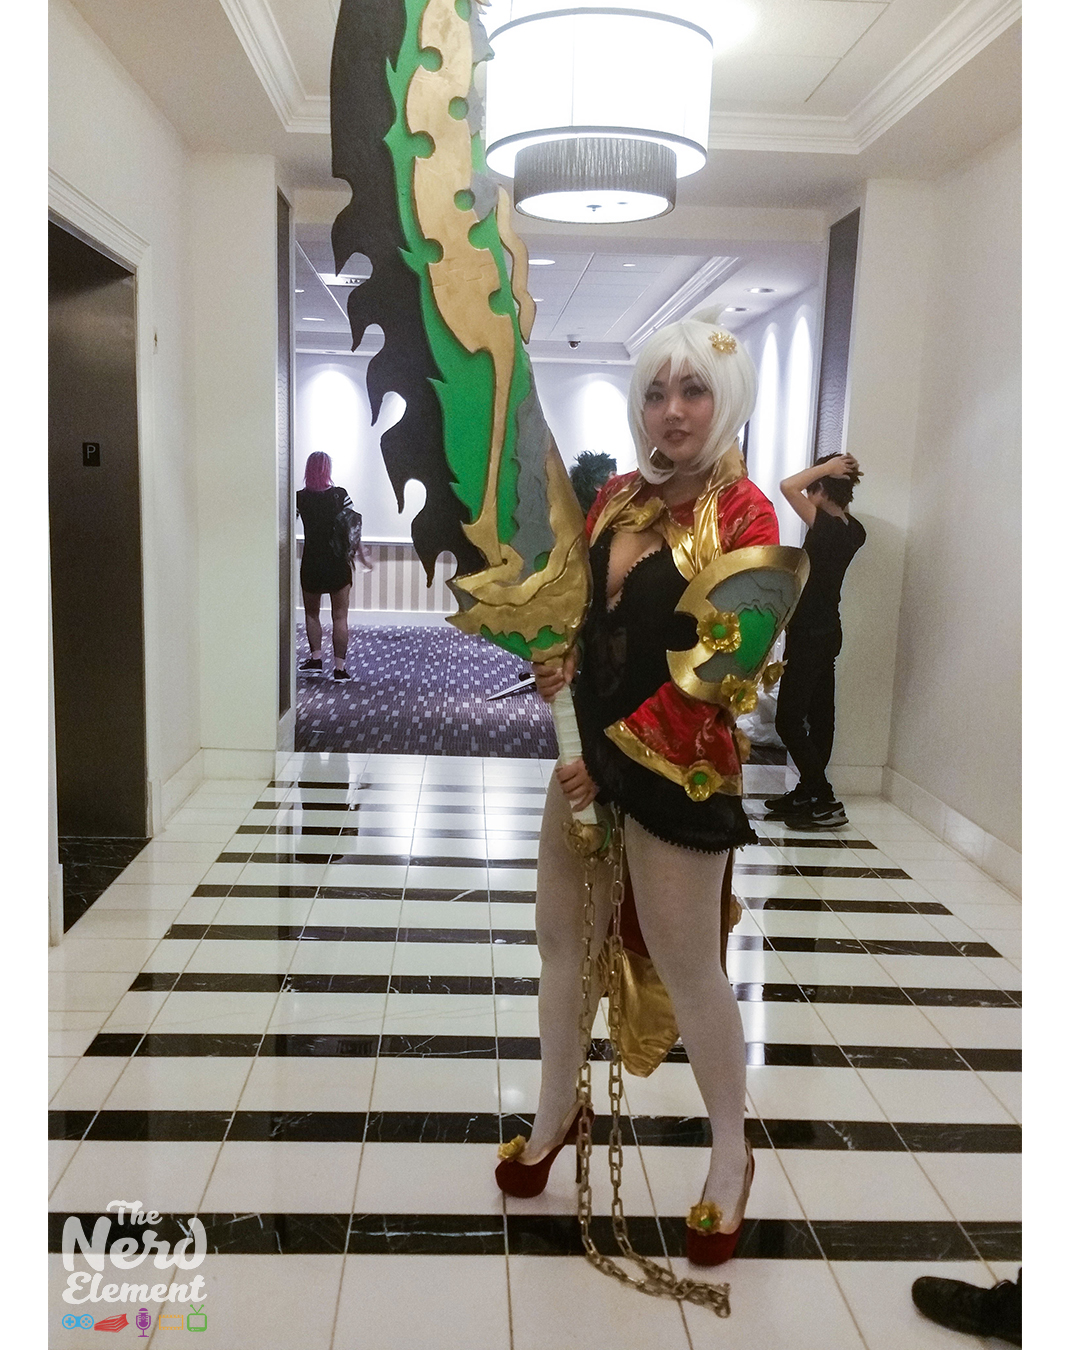 Riven (Dragonblade skin) - League of Legends
Cosplayer: unknown